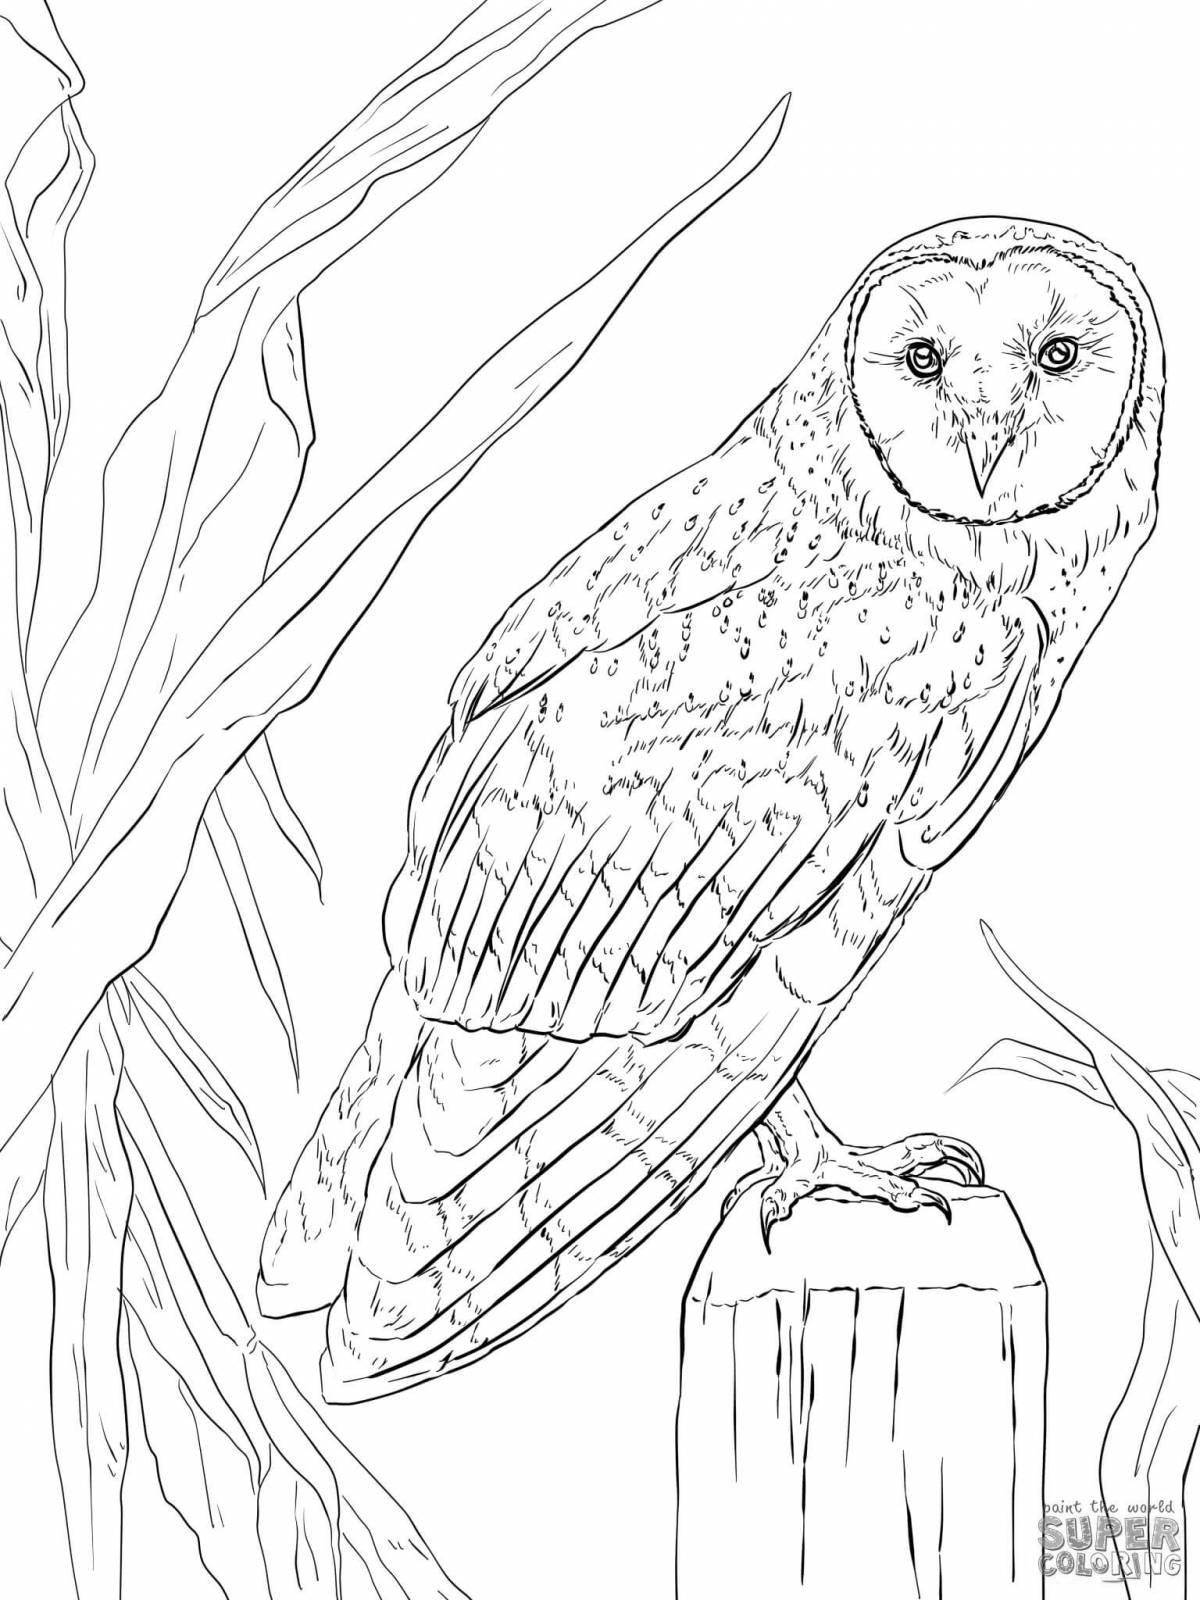 Delightful long-eared owl coloring book